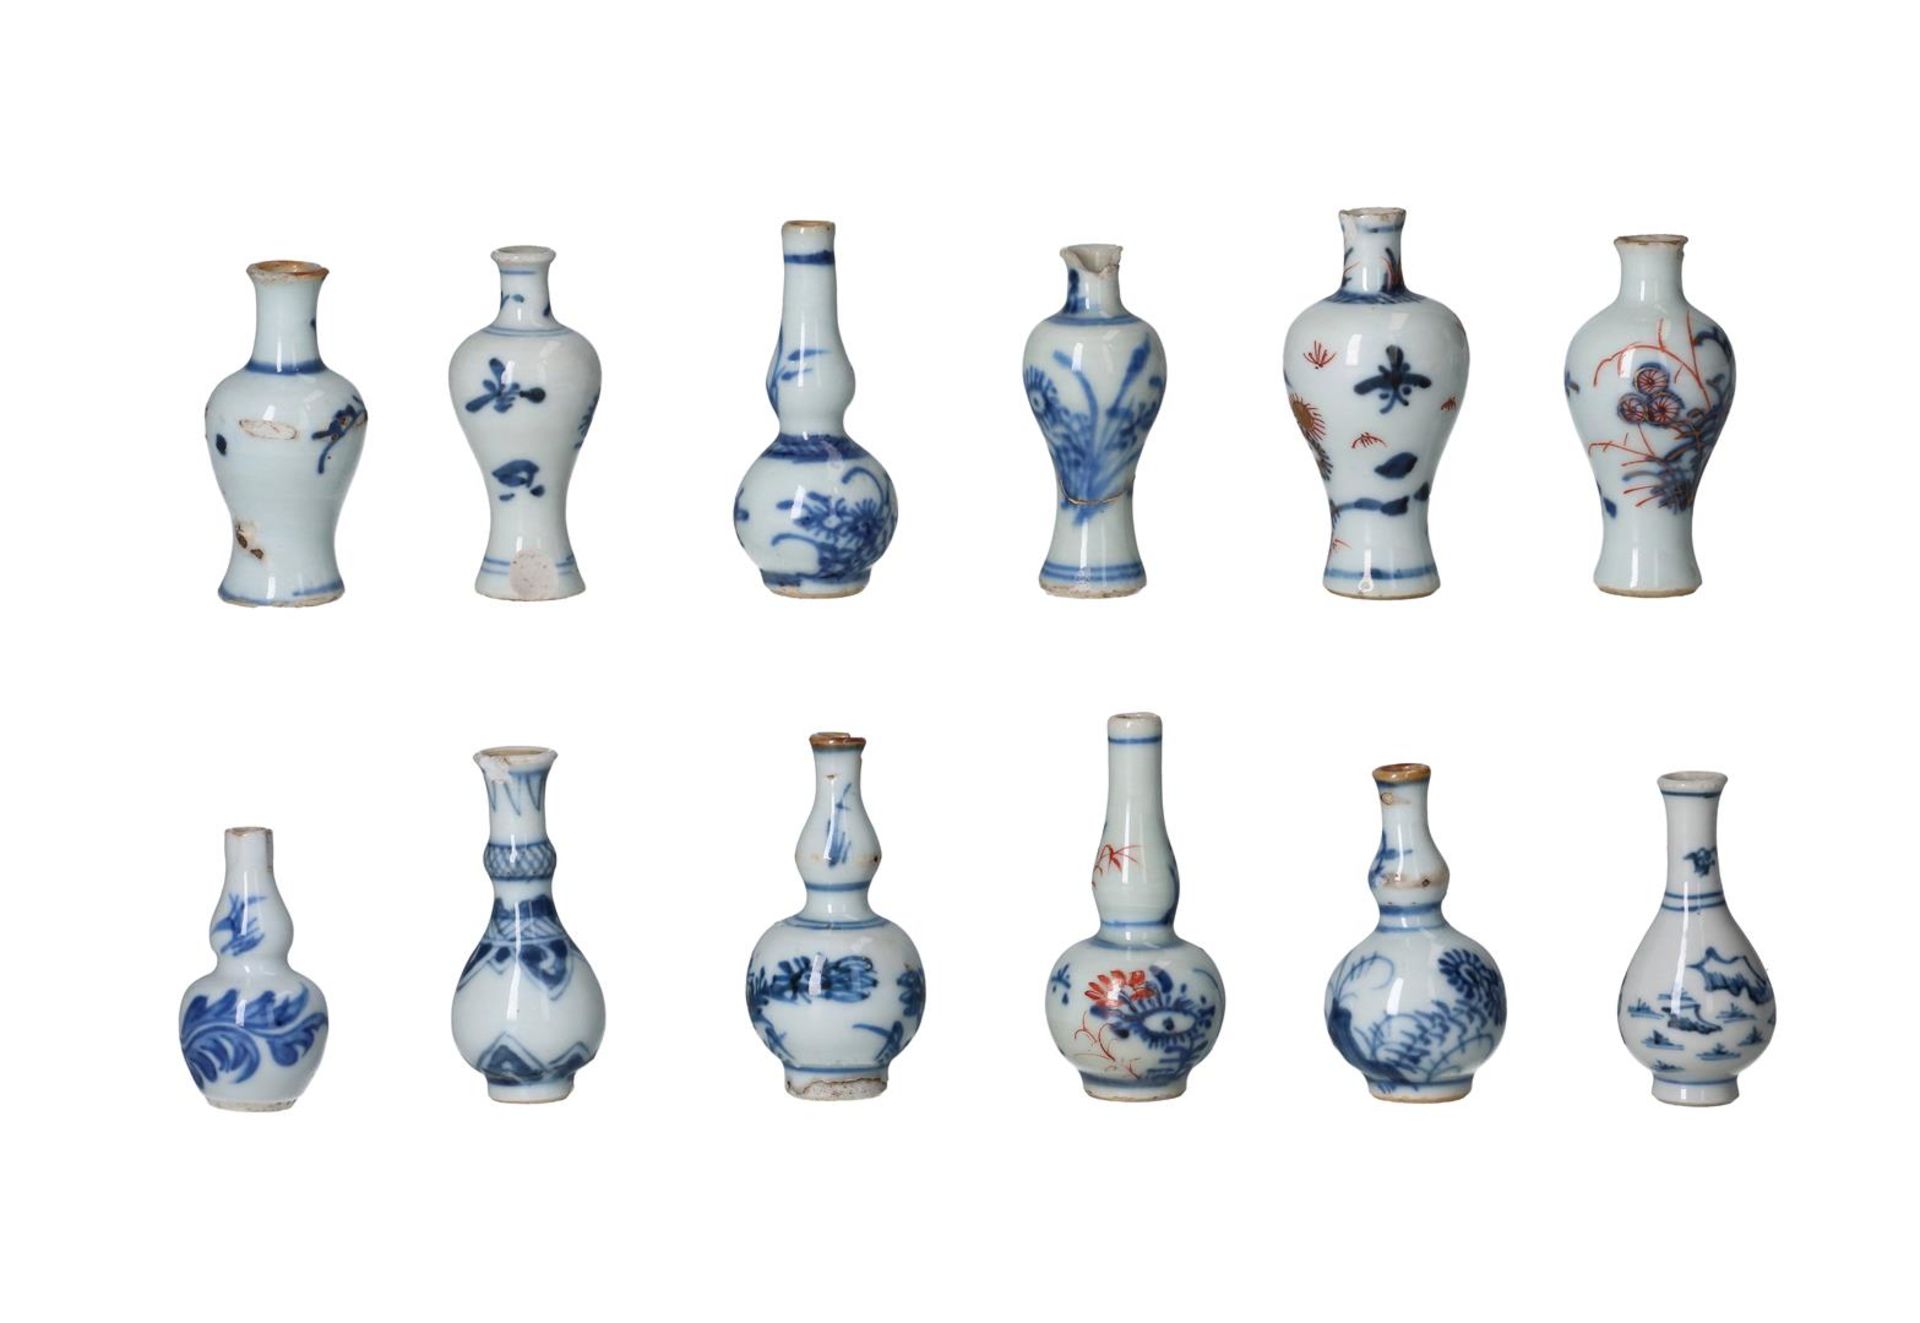 Lot of twelve blue and white Imari porcelain miniature vases, decorated with flowers. Unmarked.